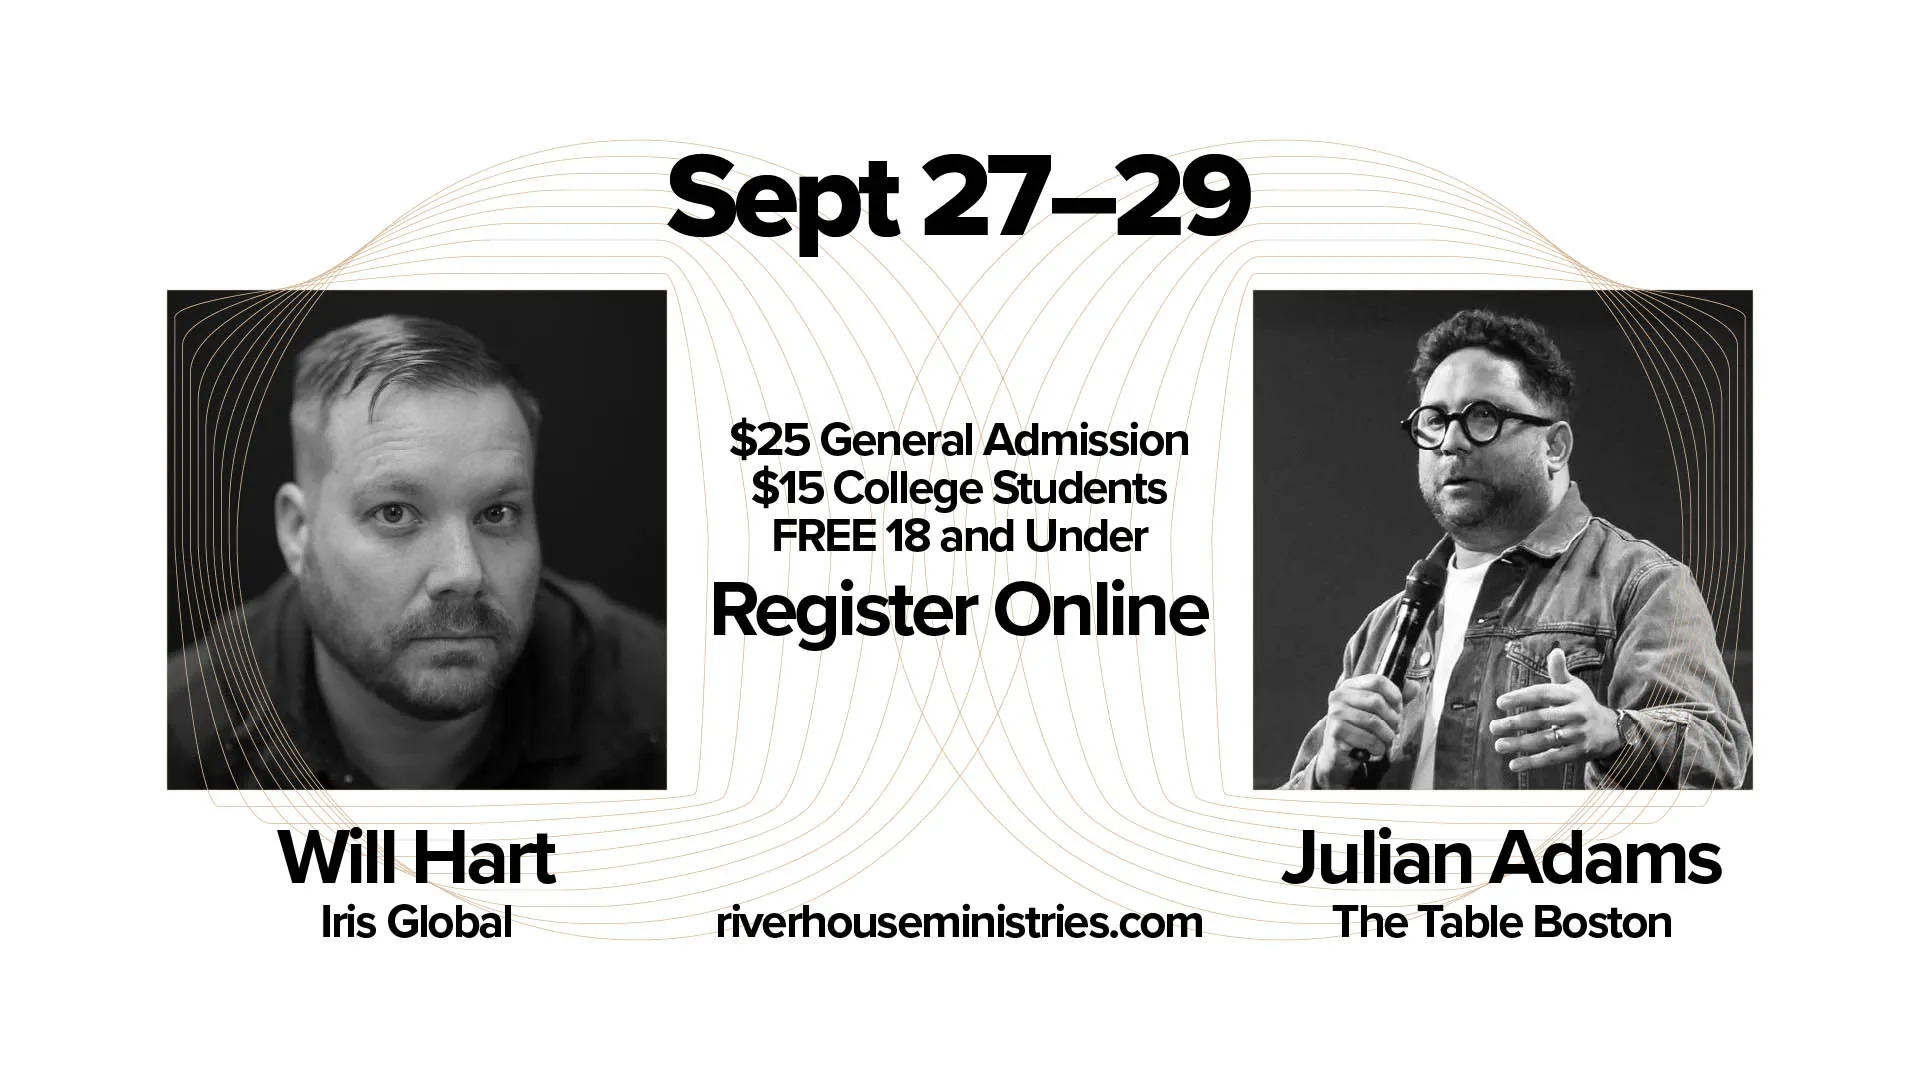 Will Hart, Iris Global, and Julian Adams, The Table Boston, are joining us in September. Register online!